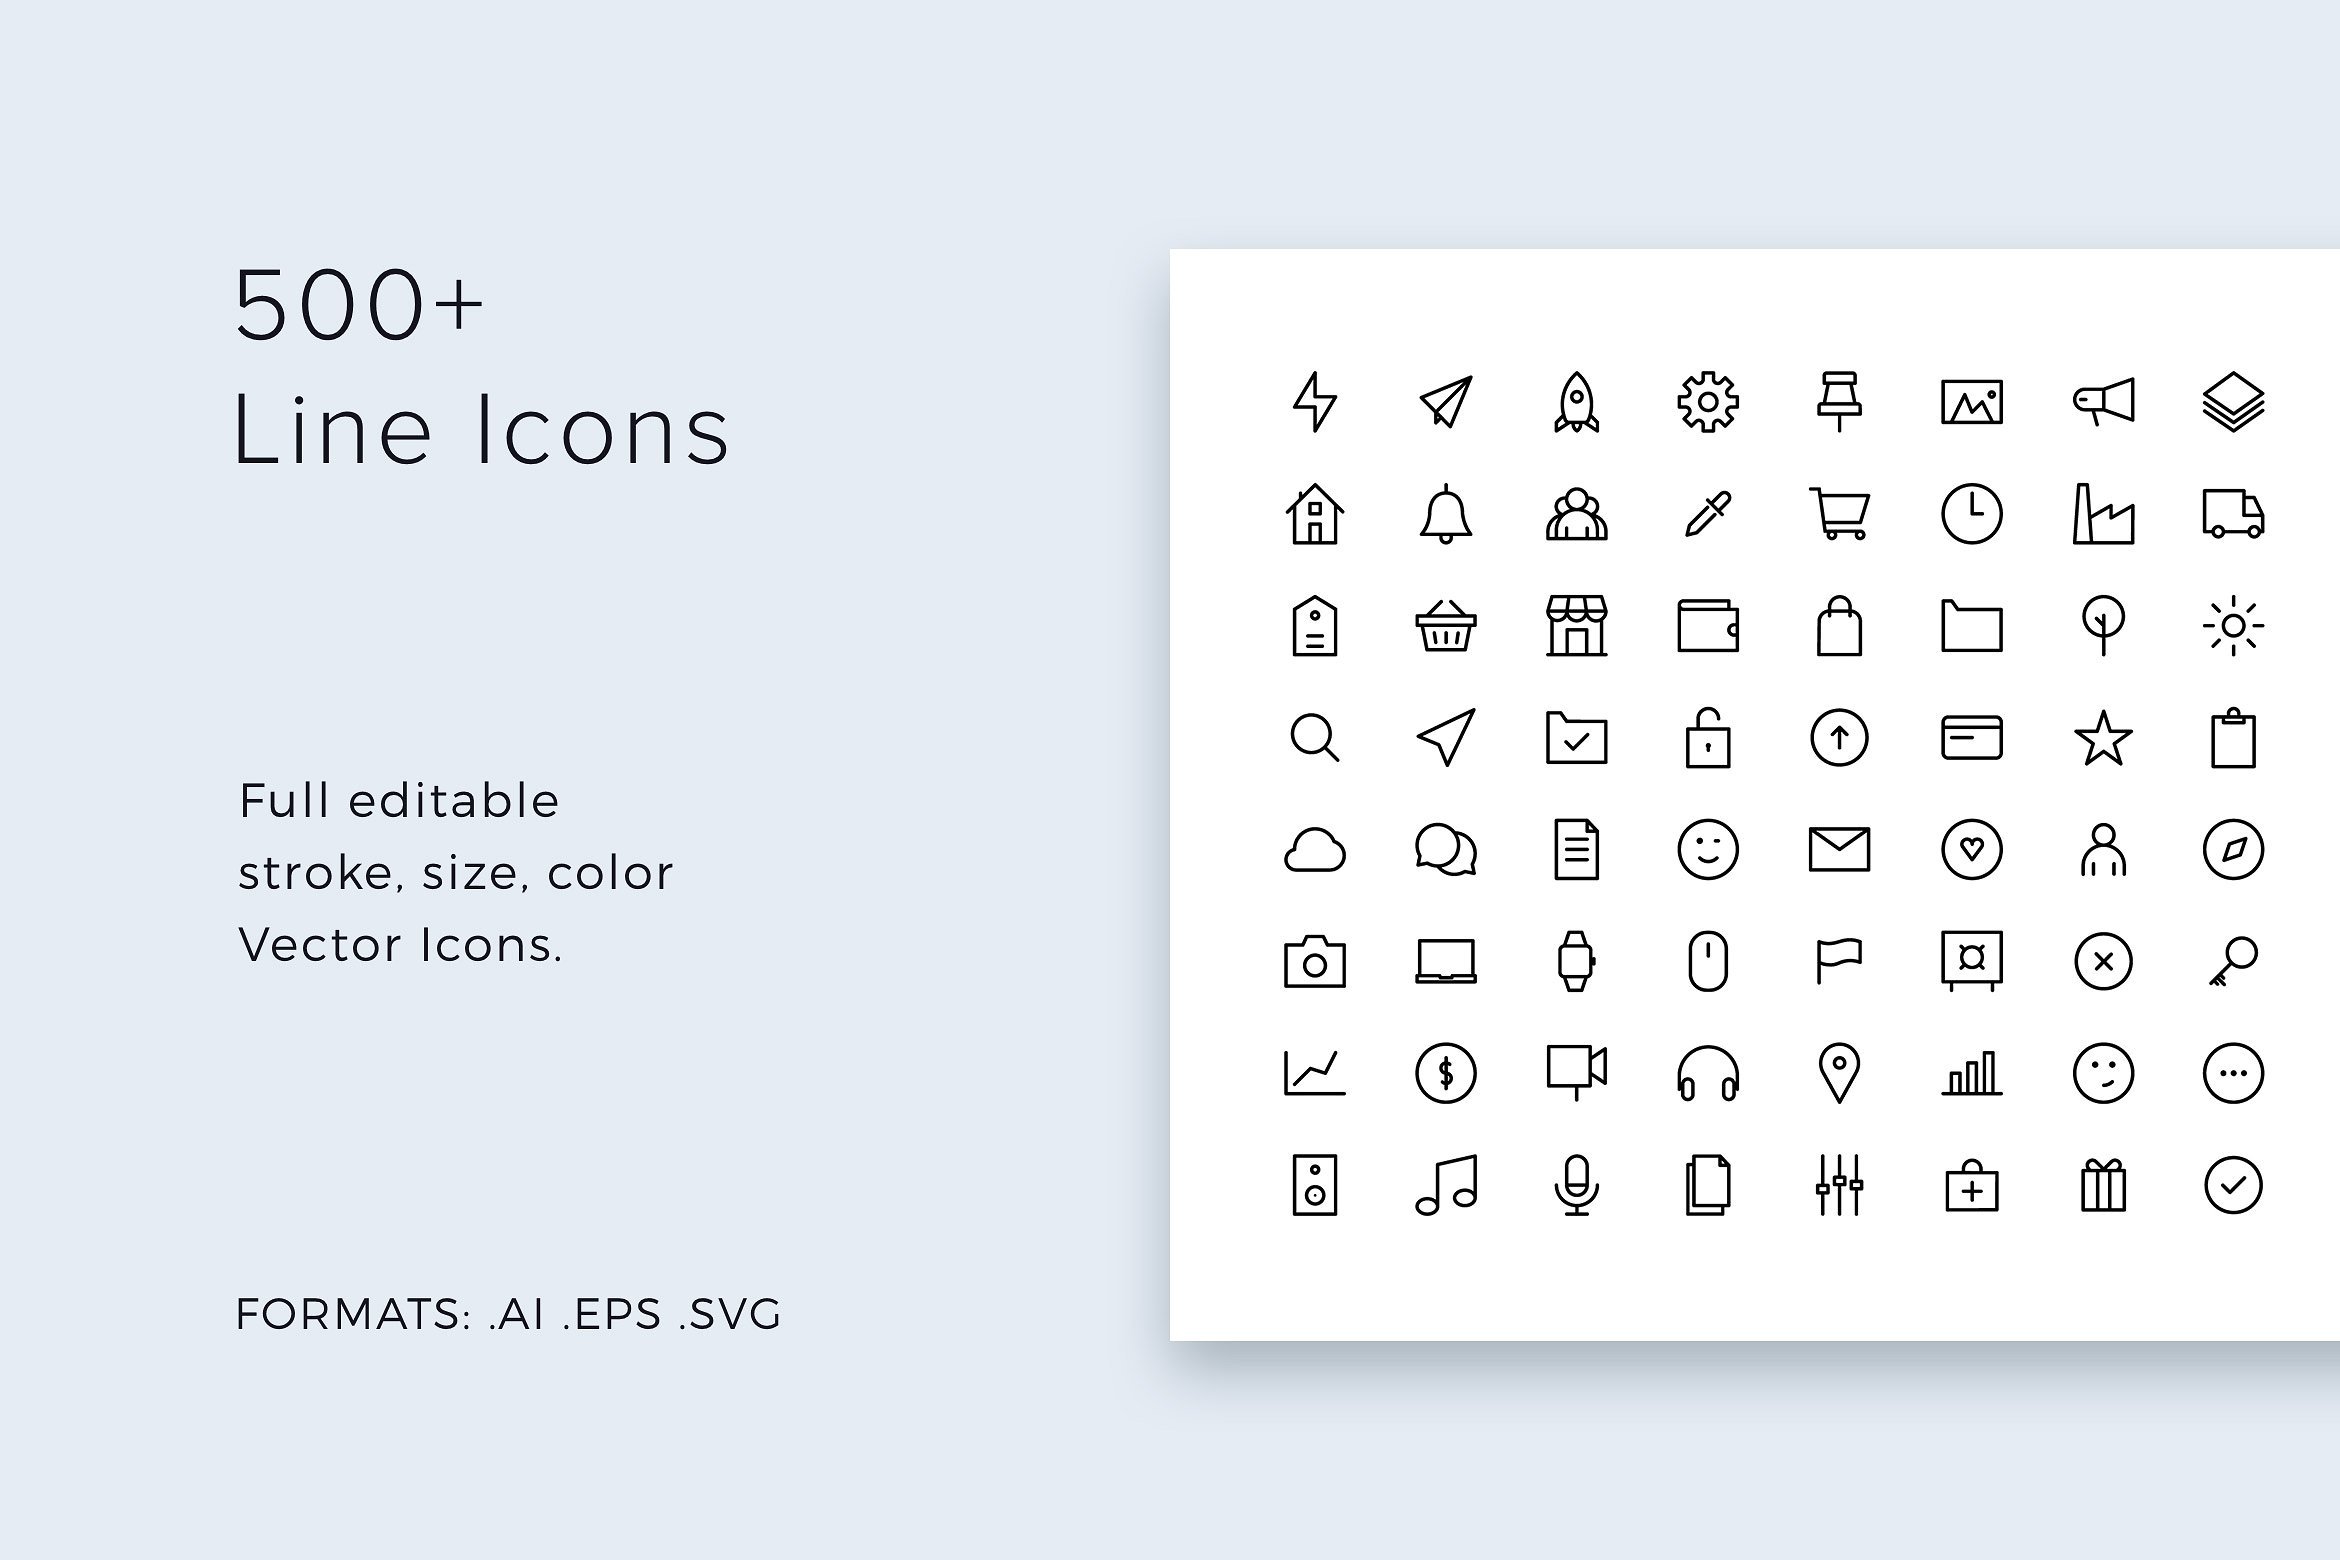 500 line icons preview2 987